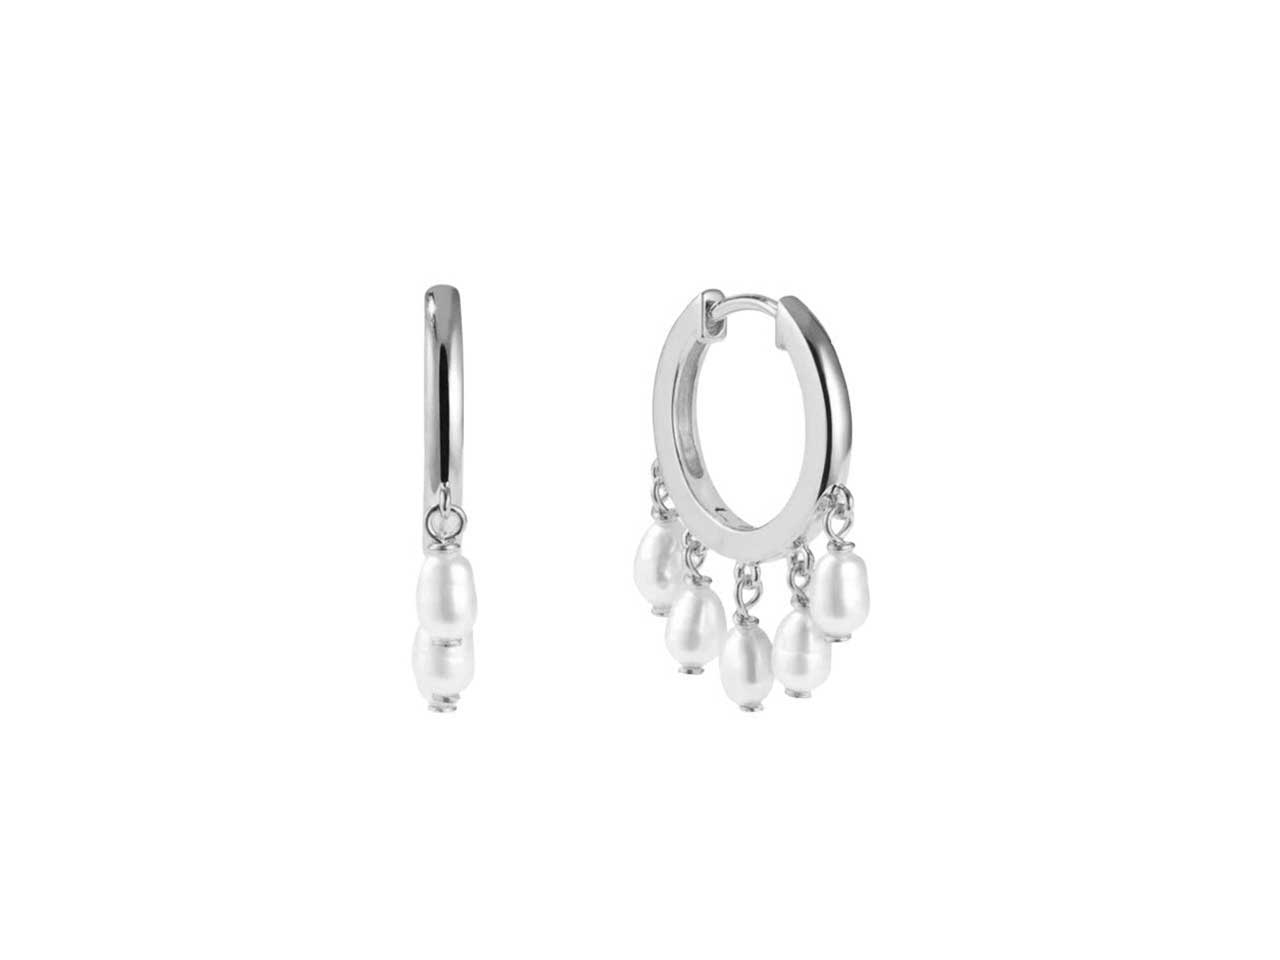 A silver jewellery pair of earrings from Canadian brand Suetables.